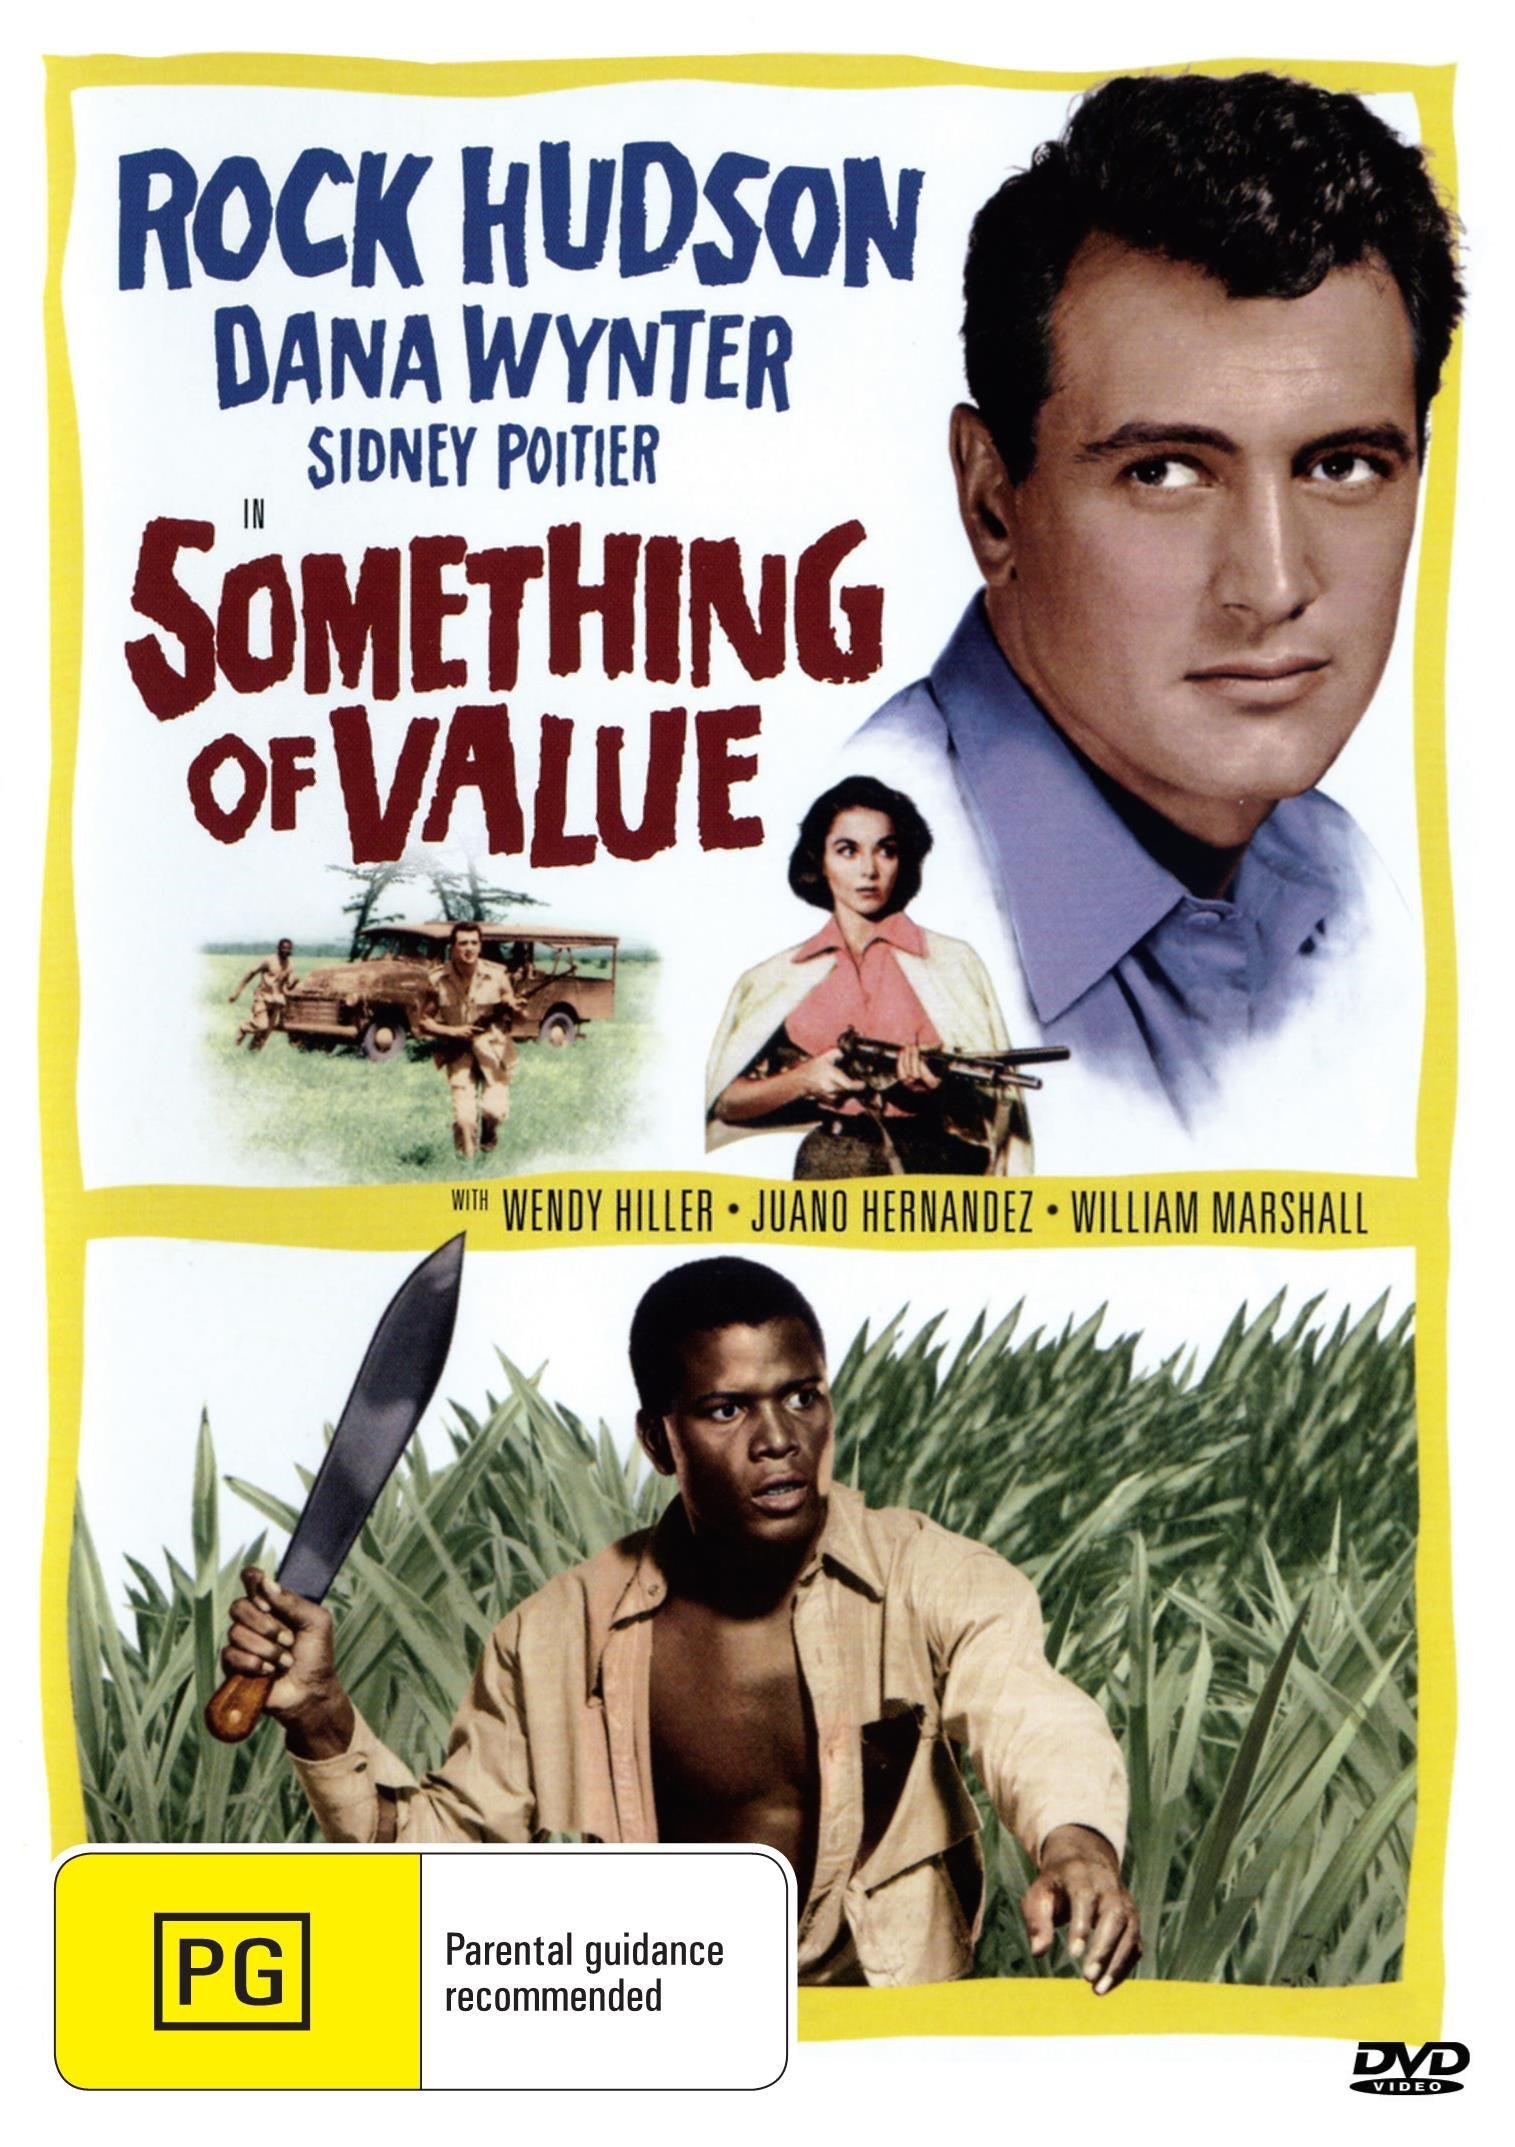 Something Of Value rareandcollectibledvds